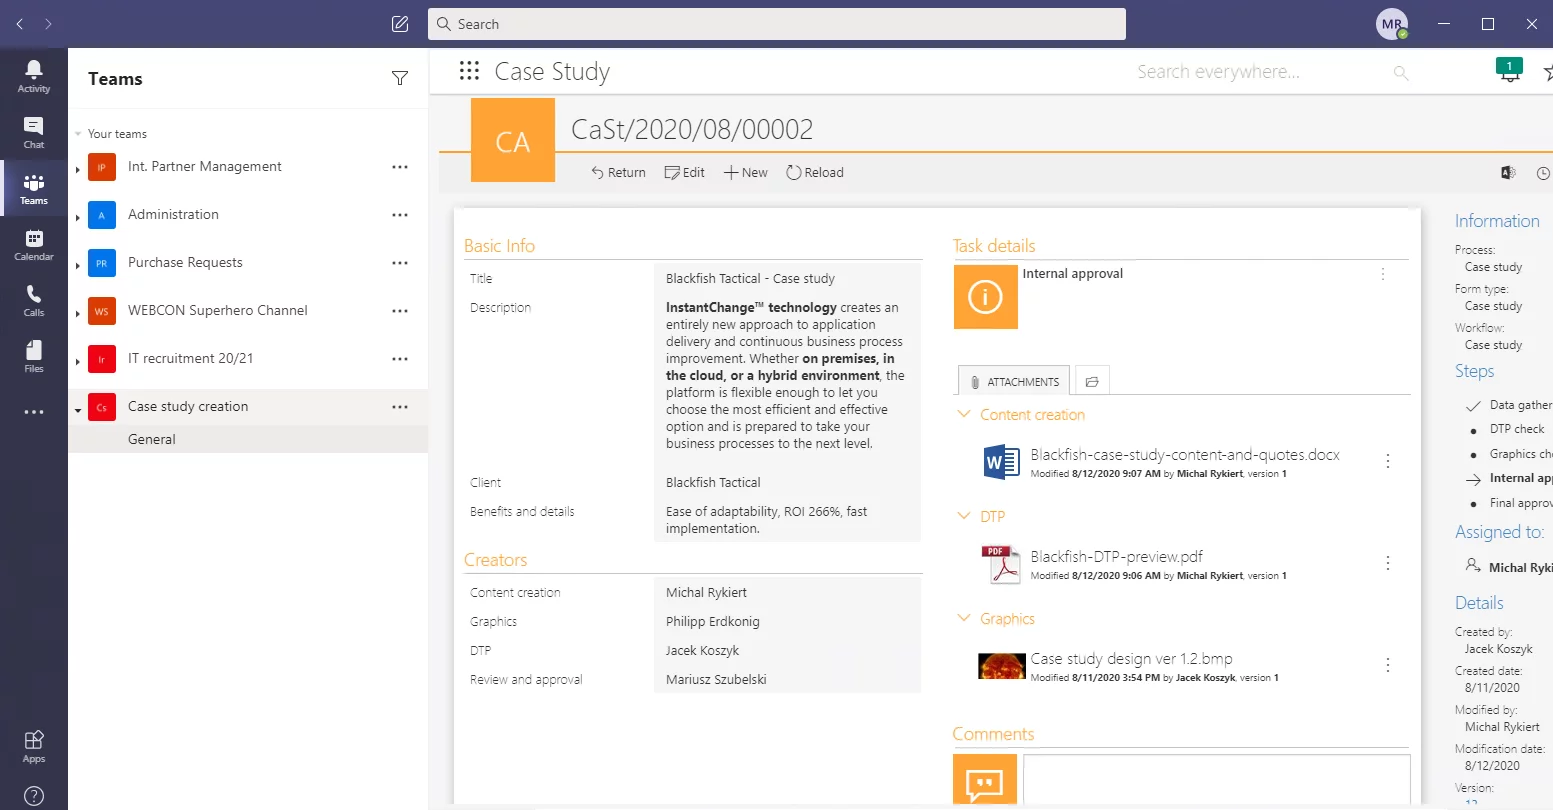 WEBCON BPS integrated with Microsoft Teams